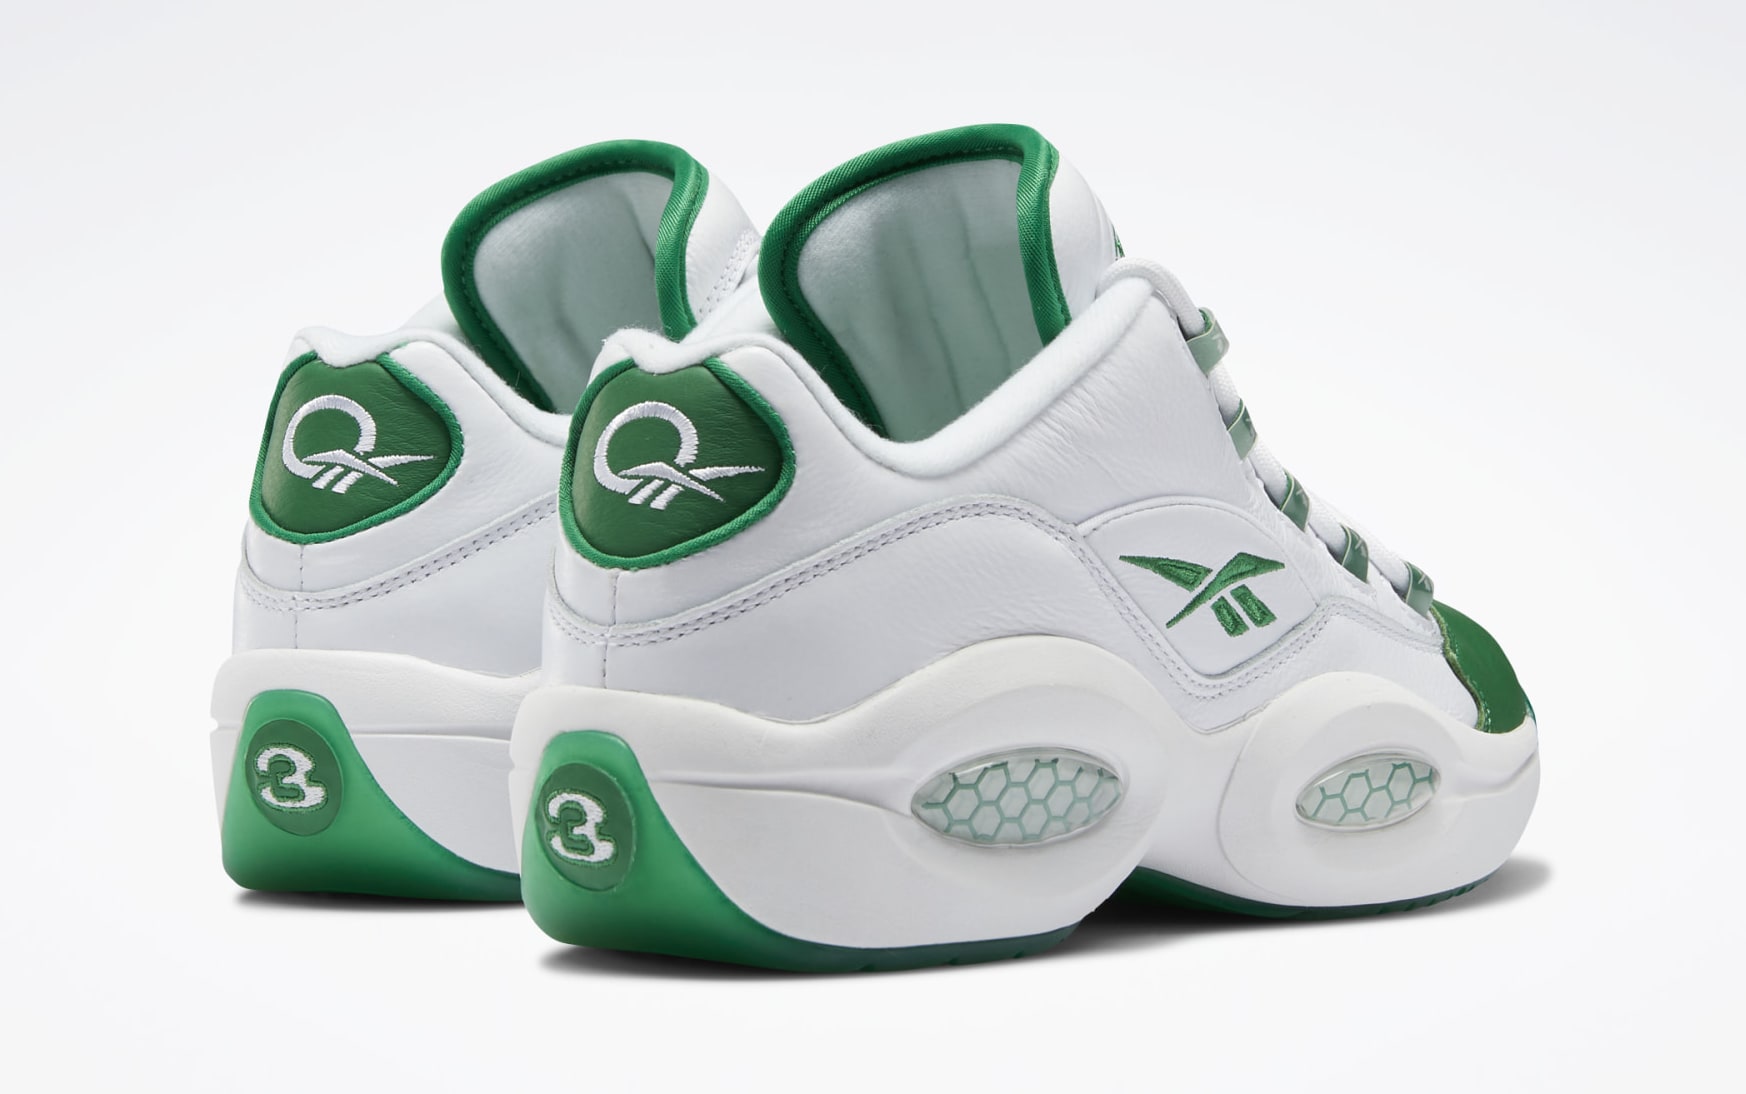 Boston's Basketball History Inspires This Reebok Question Low